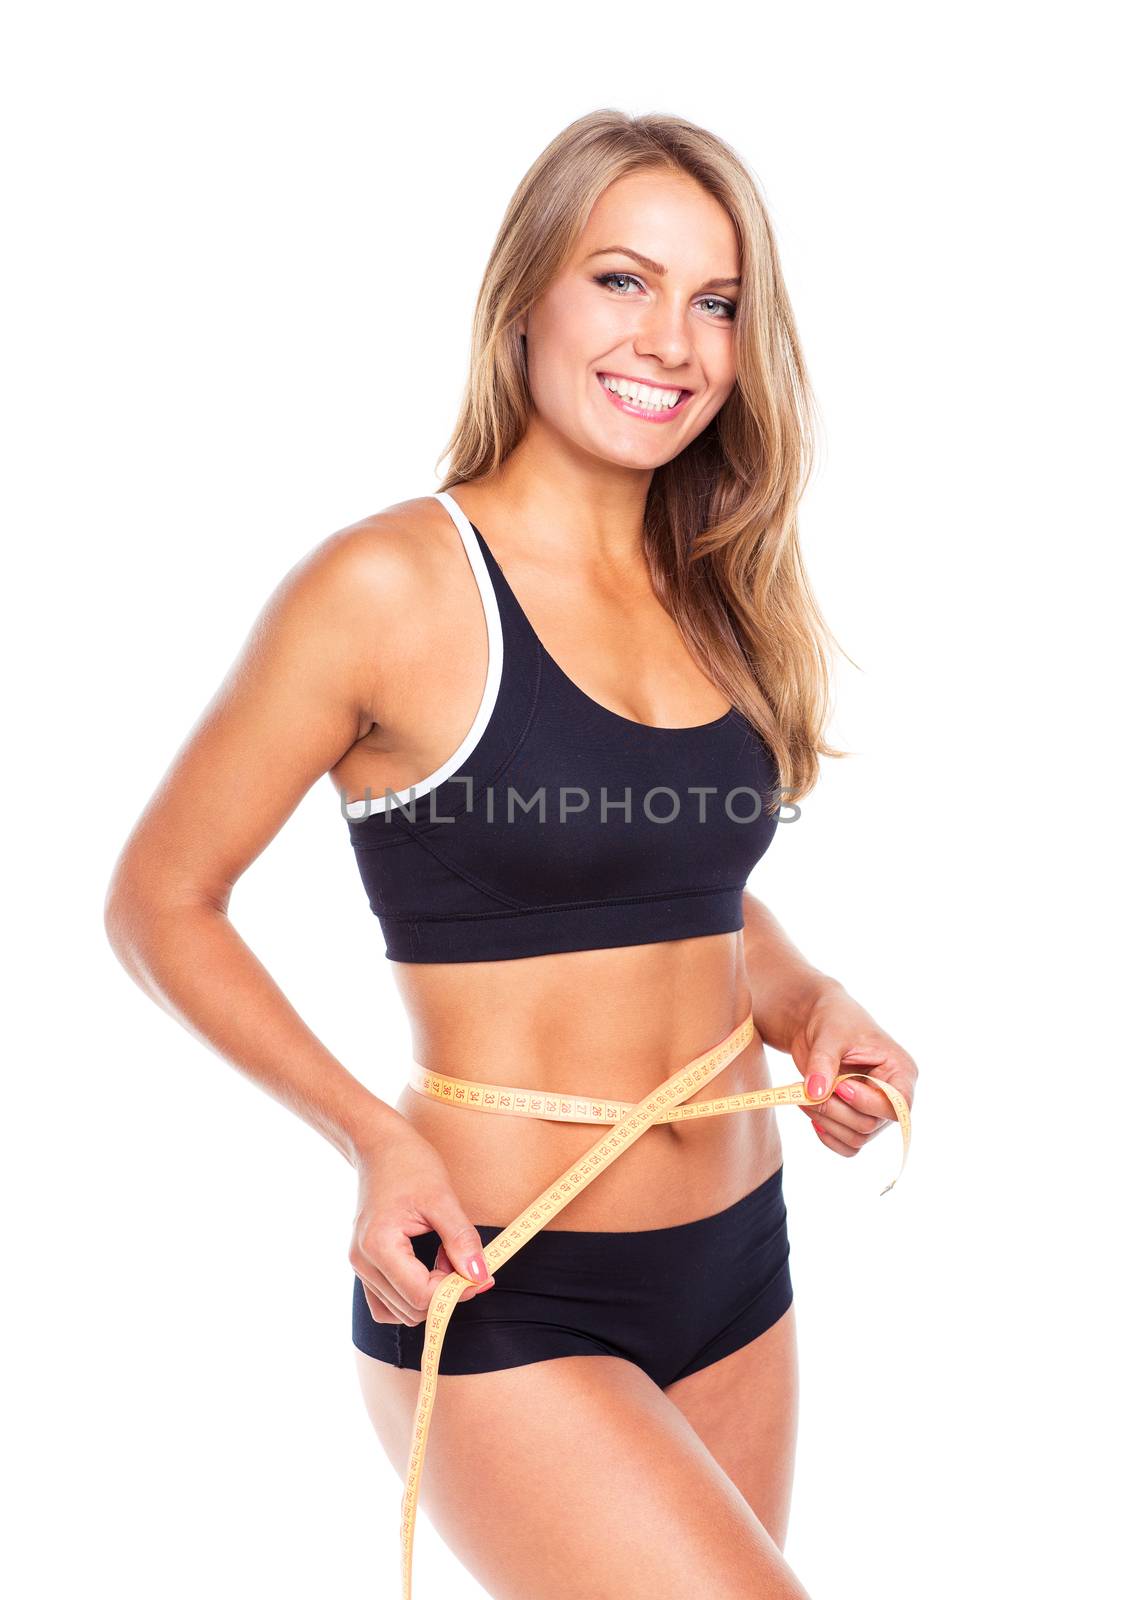 Portrait of attractive caucasian smiling woman with measuring tape isolated on white background